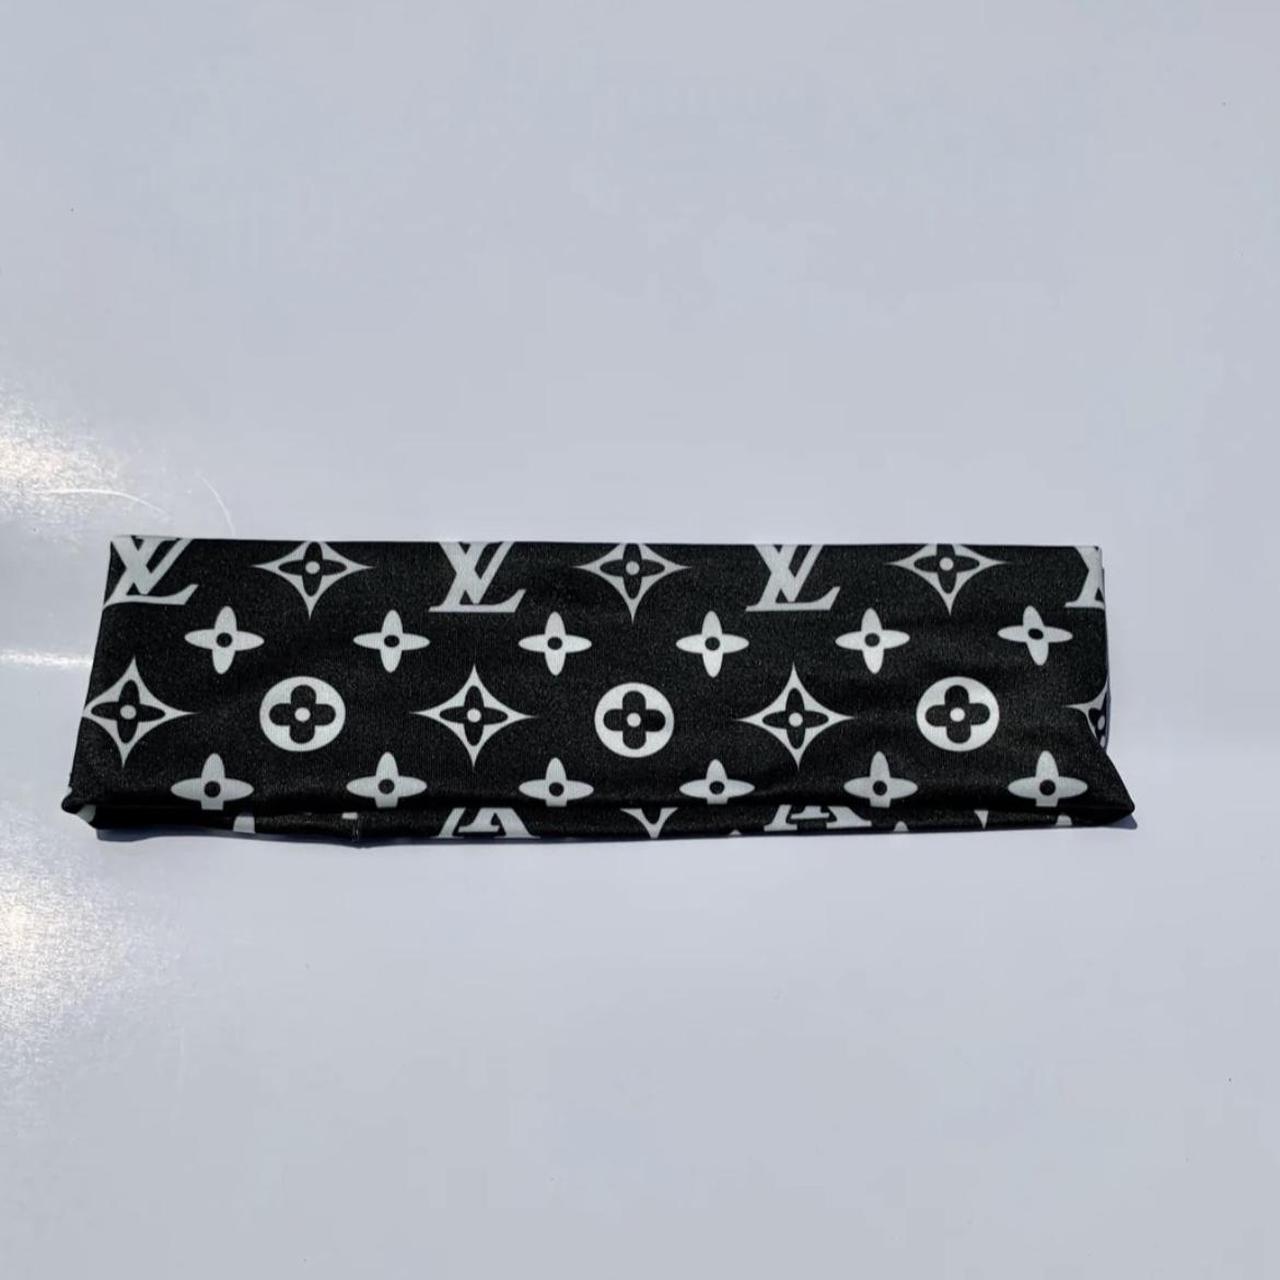 100 % Authentic Louis Vuitton Headband Black. Made in France New